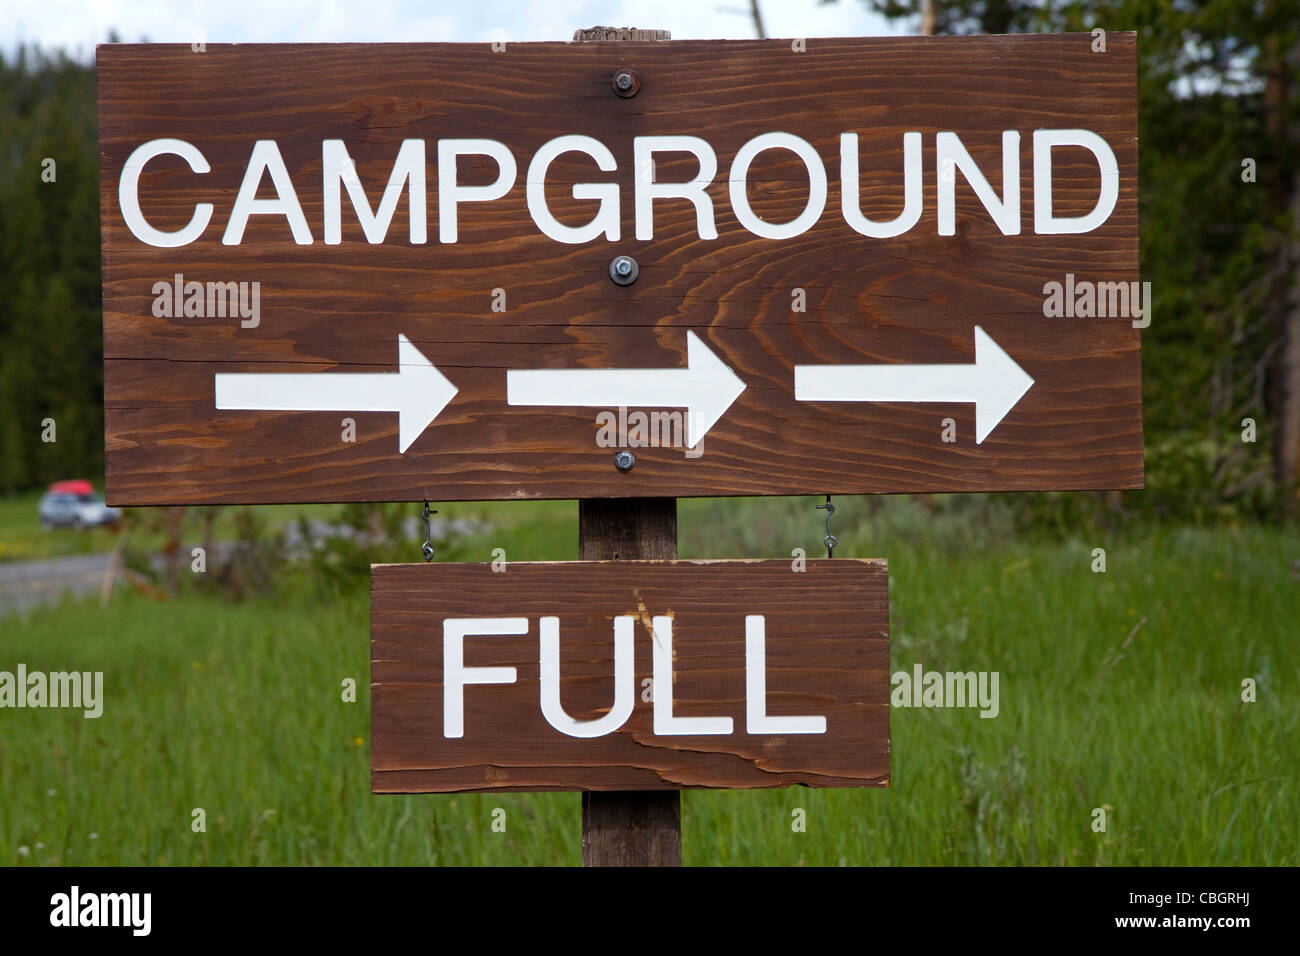 Plein de camping sign in Yellowstone National Park, Wyoming, USA. Banque D'Images